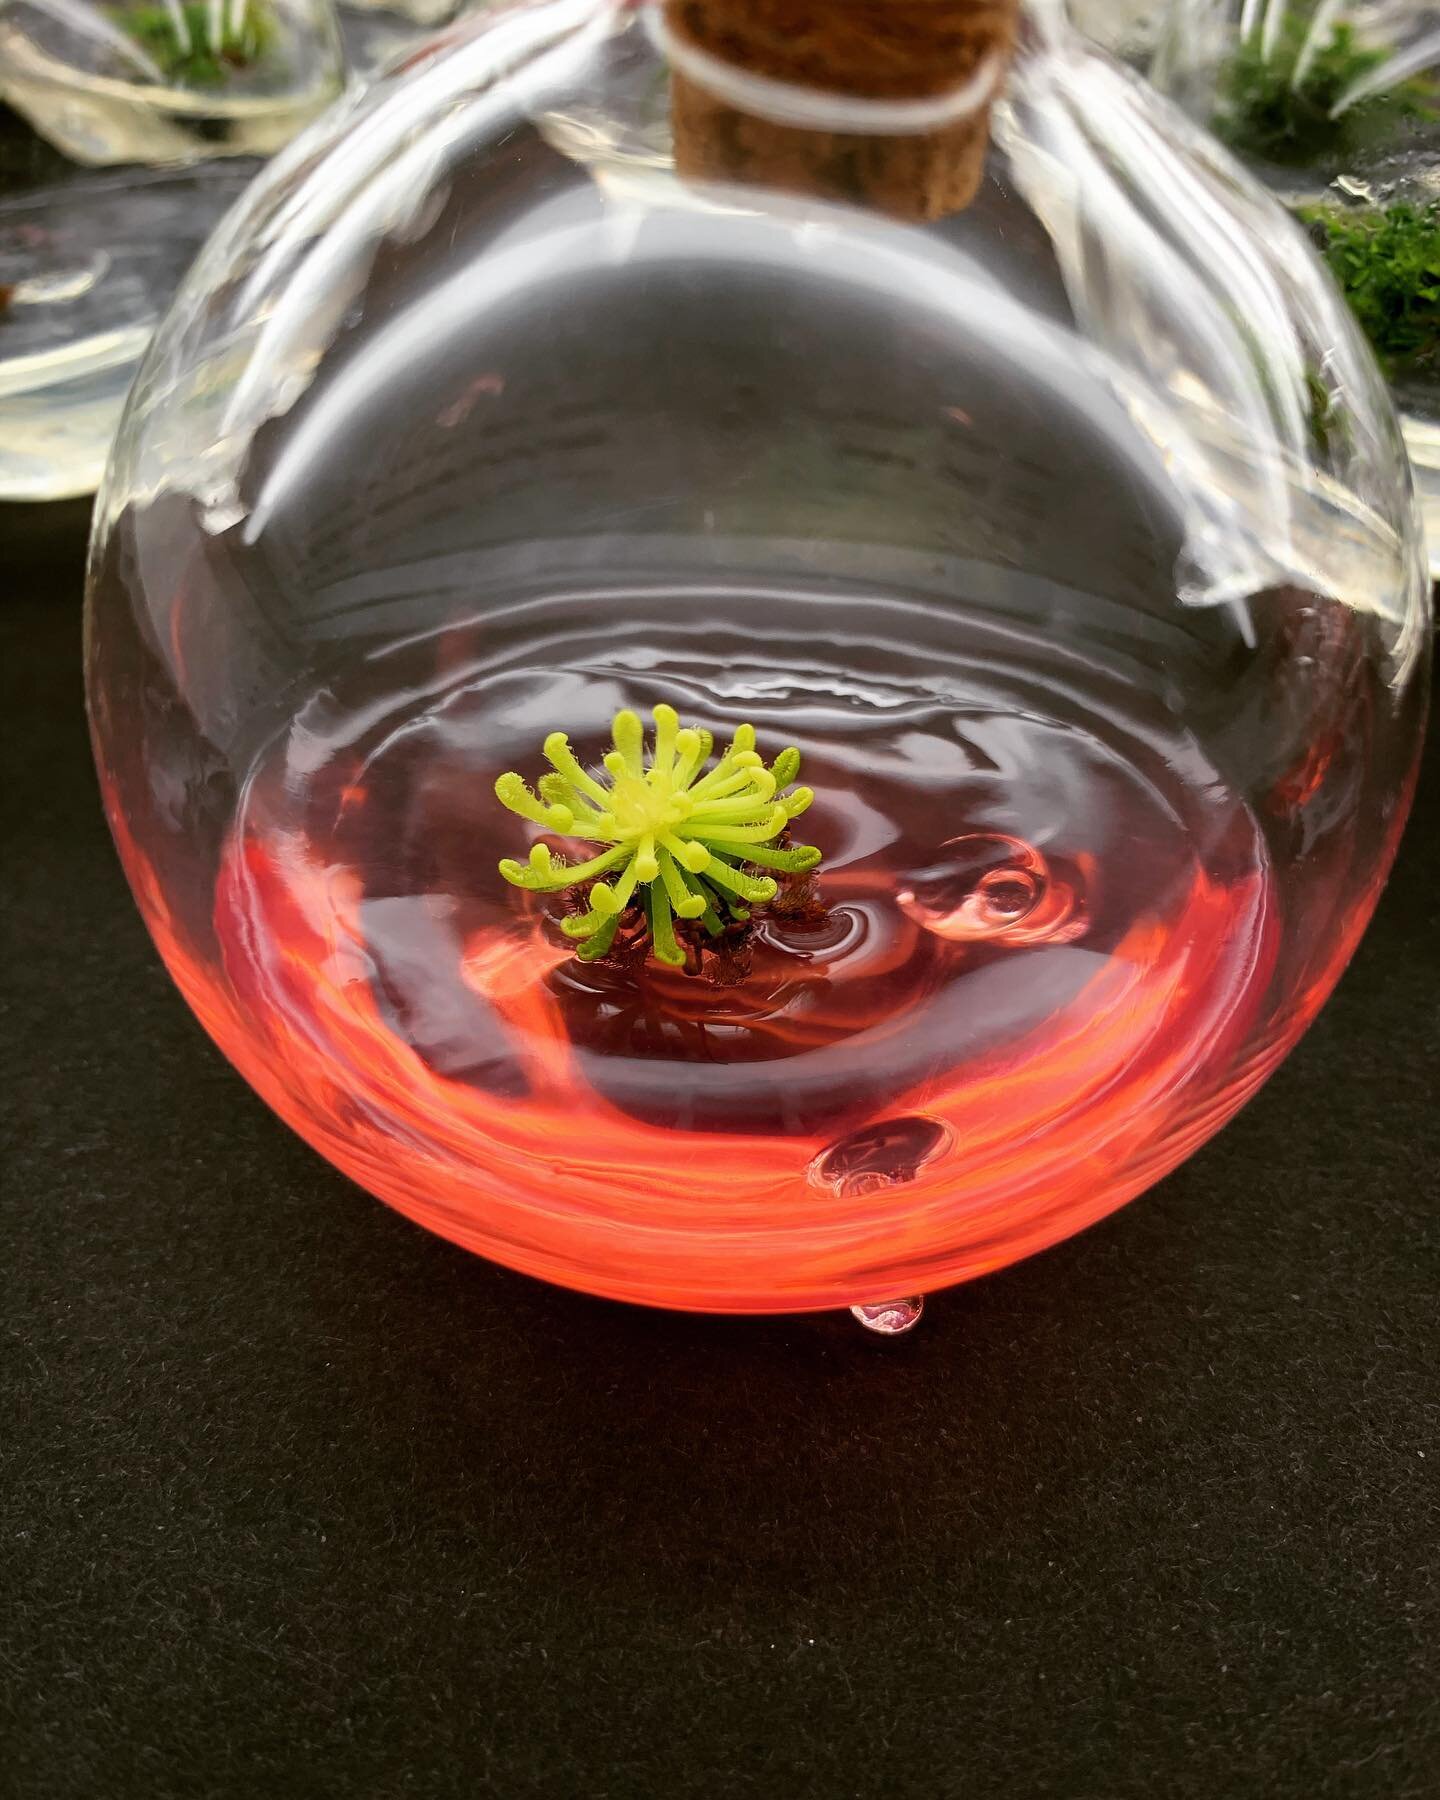 When Living Glass plants are left in the dark; they continue to grow but lose their colour. Comment below on why you think that happens! 🧪
.
.
.
.
.
#redefinethehouseplant #livingglass #carnivorousplants #sundew #houseplants #plants #plantsofinstagr